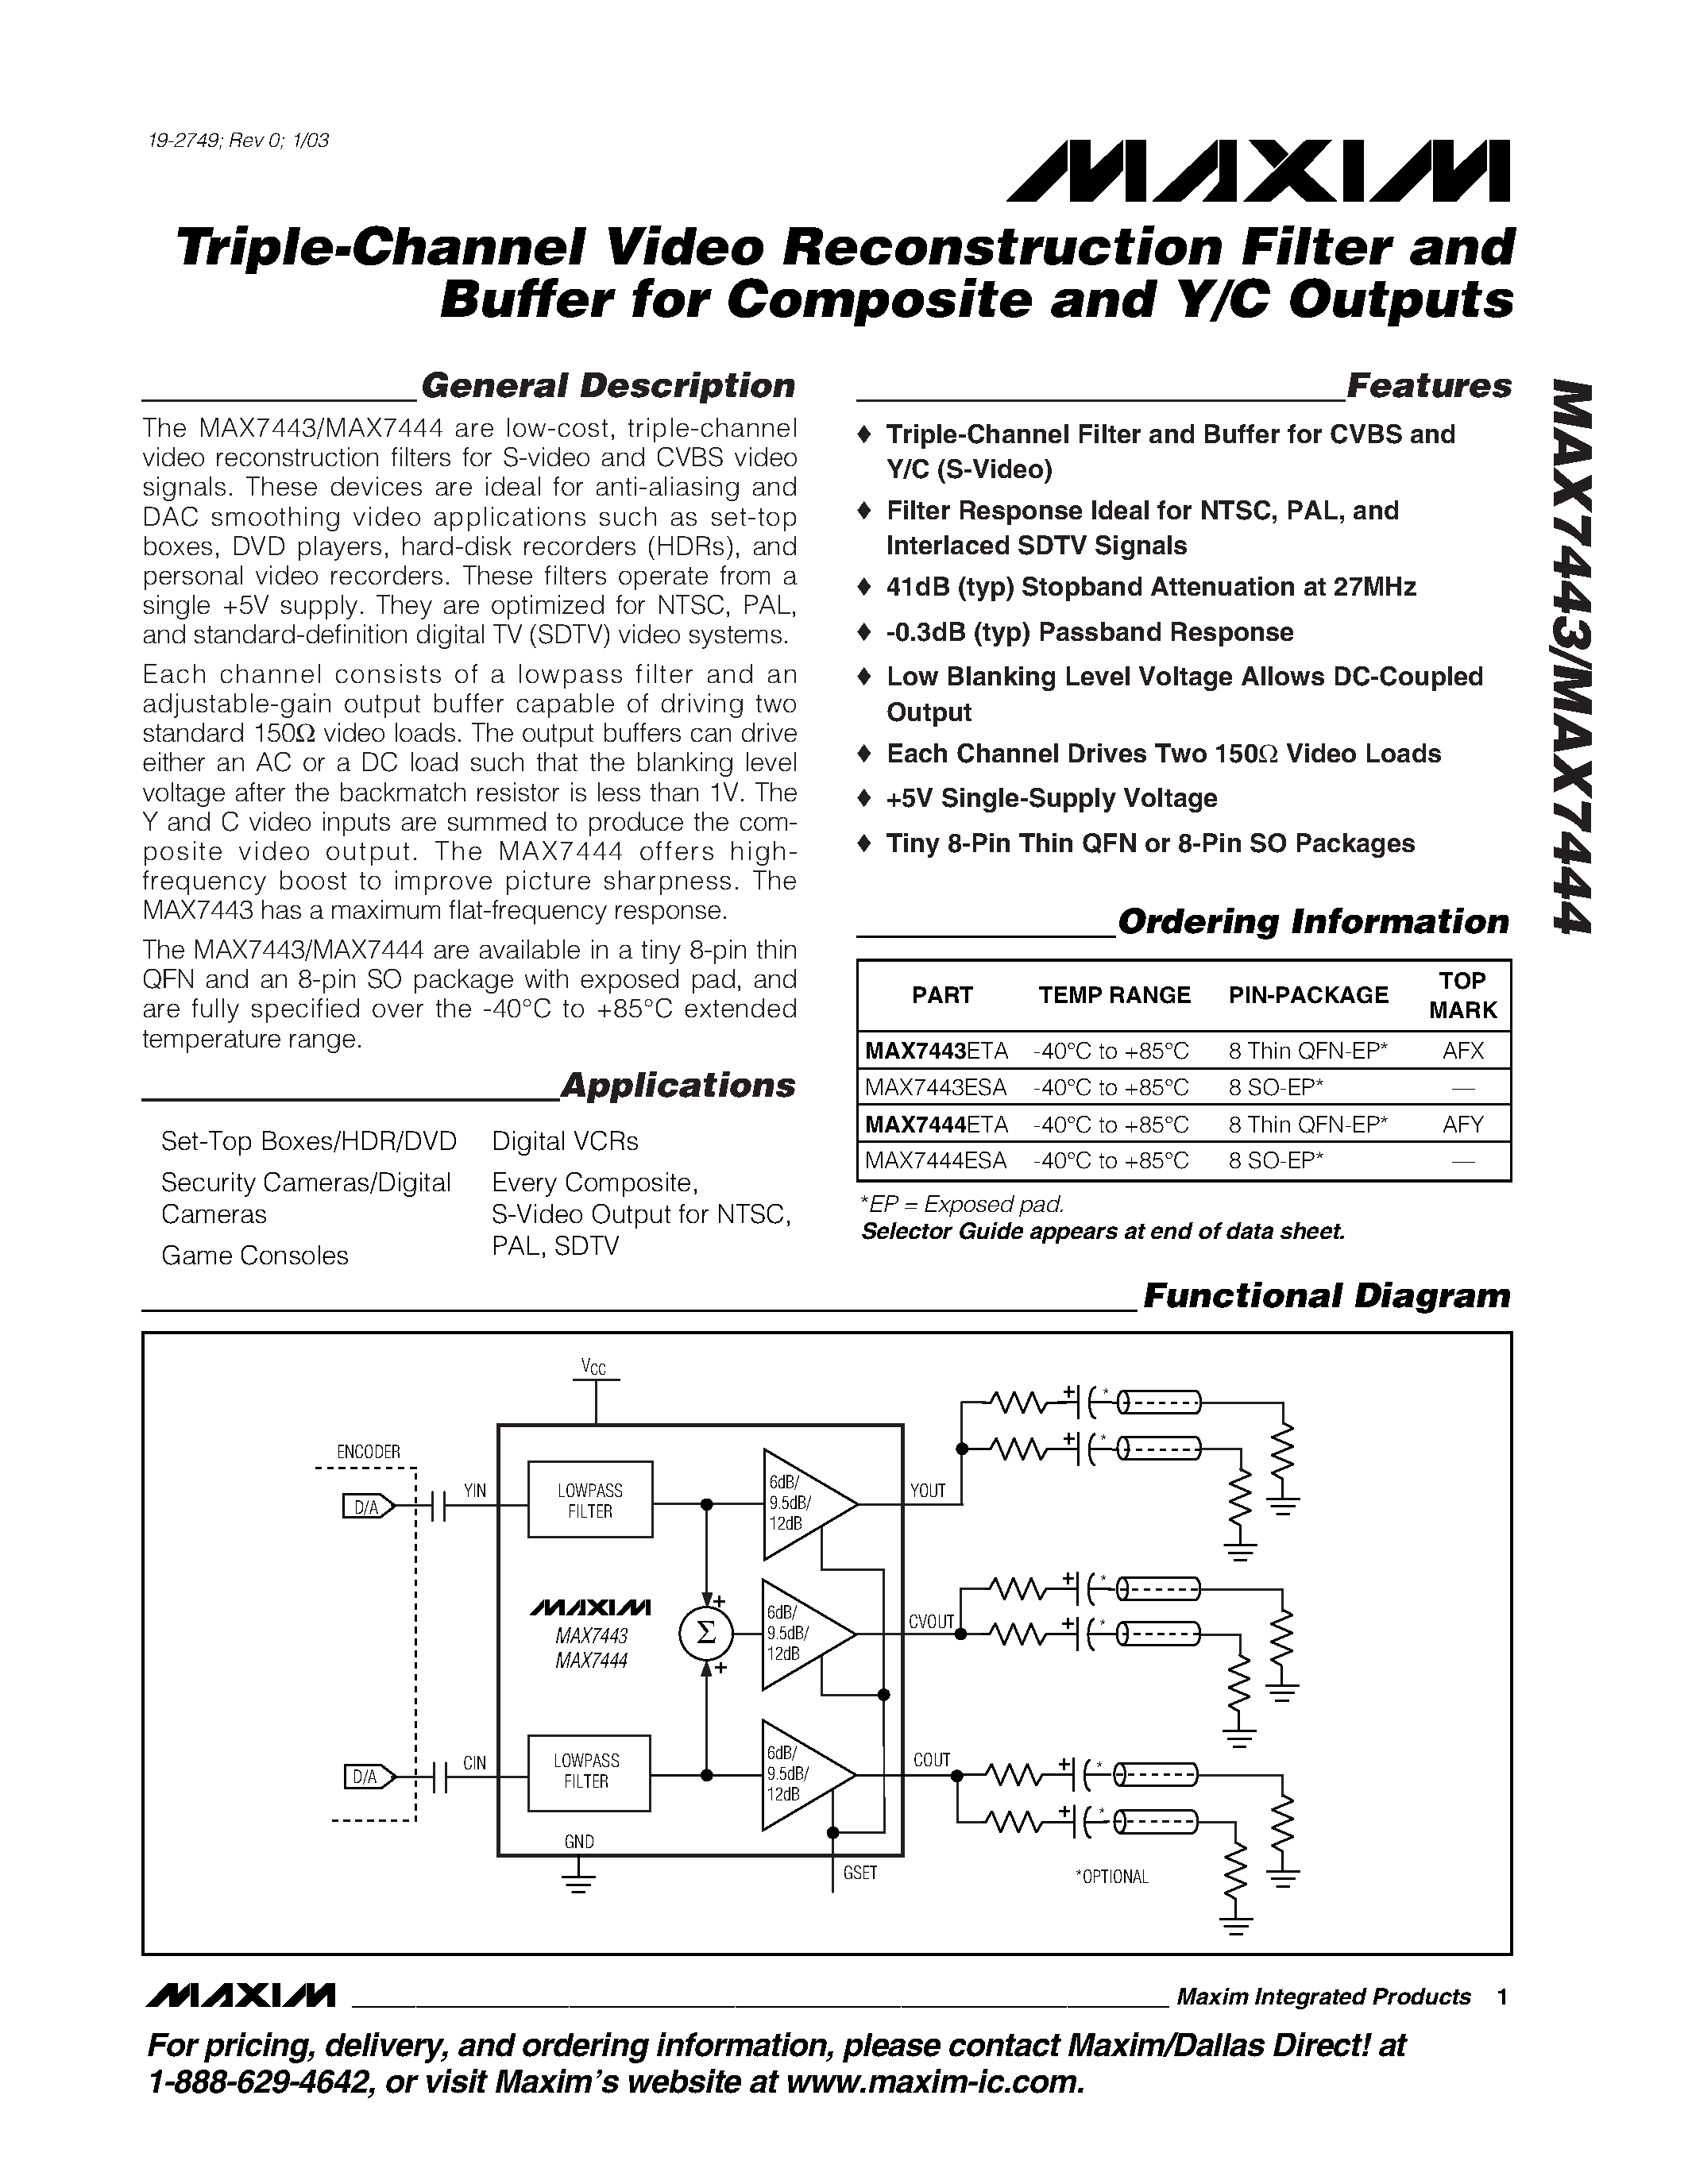 Datasheet MAX7444ESA - Triple-Channel Video Reconstruction Filter and Buffer for Composite and Y/C Outputs page 1